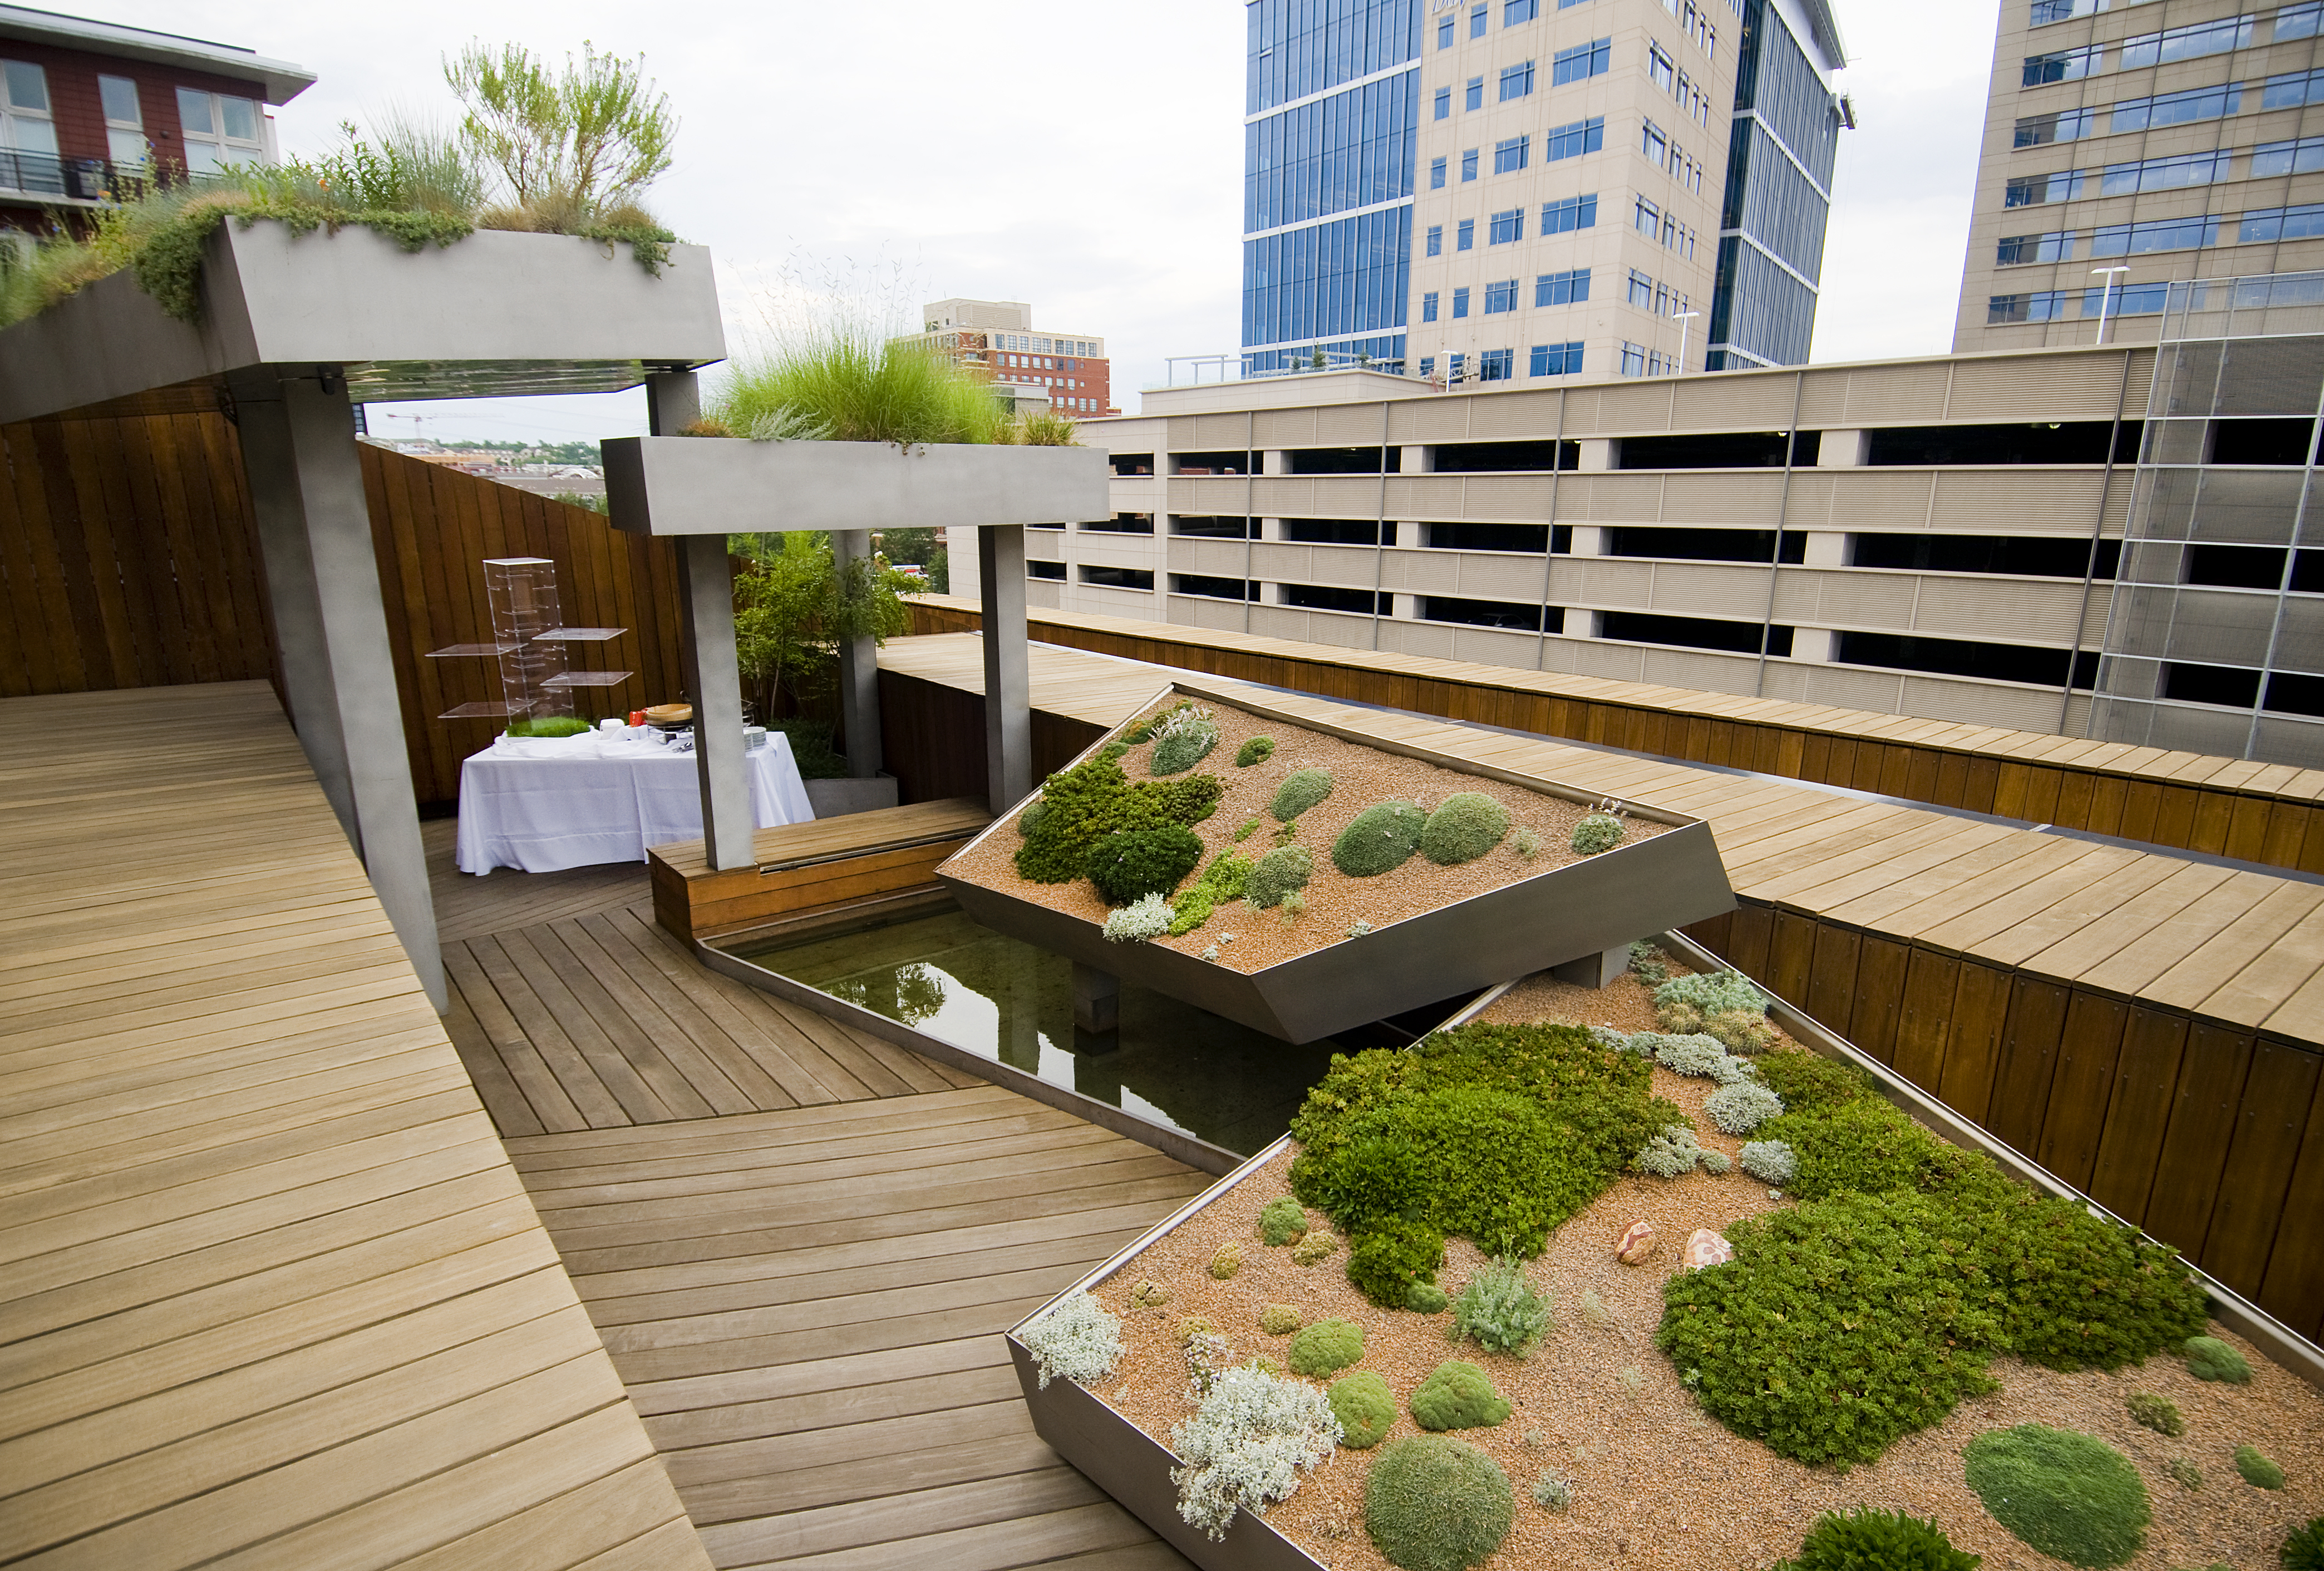 An outdoor garden on a wooden rooftop boasts diverse plants above a small reflecting pool. Below a risen garden is a table with food. In the background are tall buildings and a parking garage. 